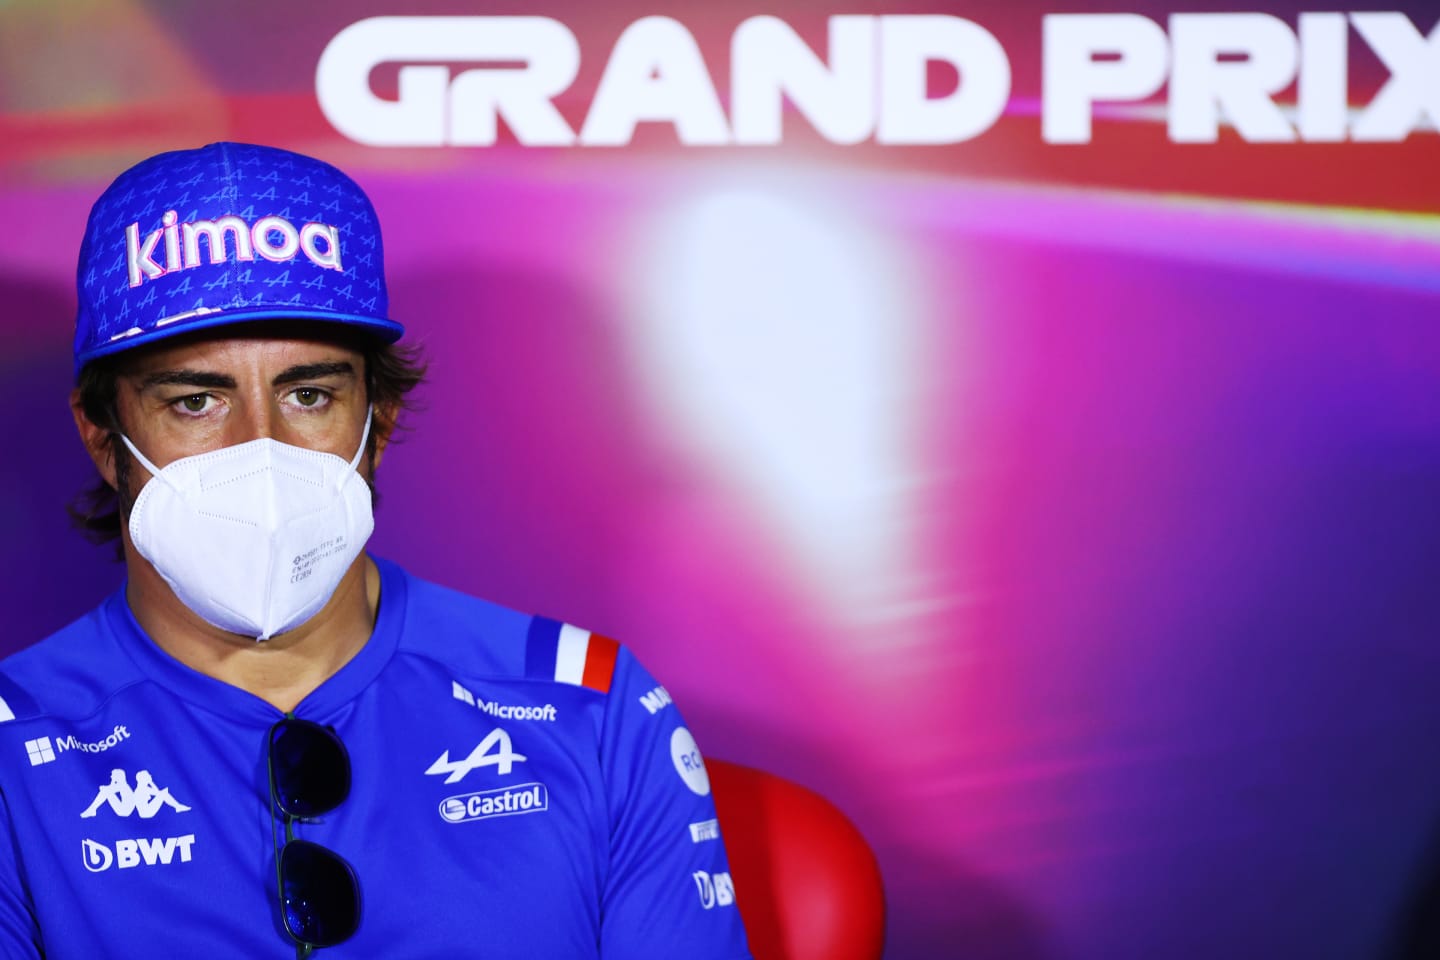 JEDDAH, SAUDI ARABIA - MARCH 25: Fernando Alonso of Spain and Alpine F1 looks on in the Drivers Press Conference before practice ahead of the F1 Grand Prix of Saudi Arabia at the Jeddah Corniche Circuit on March 25, 2022 in Jeddah, Saudi Arabia. (Photo by Dan Istitene - Formula 1/Formula 1 via Getty Images)